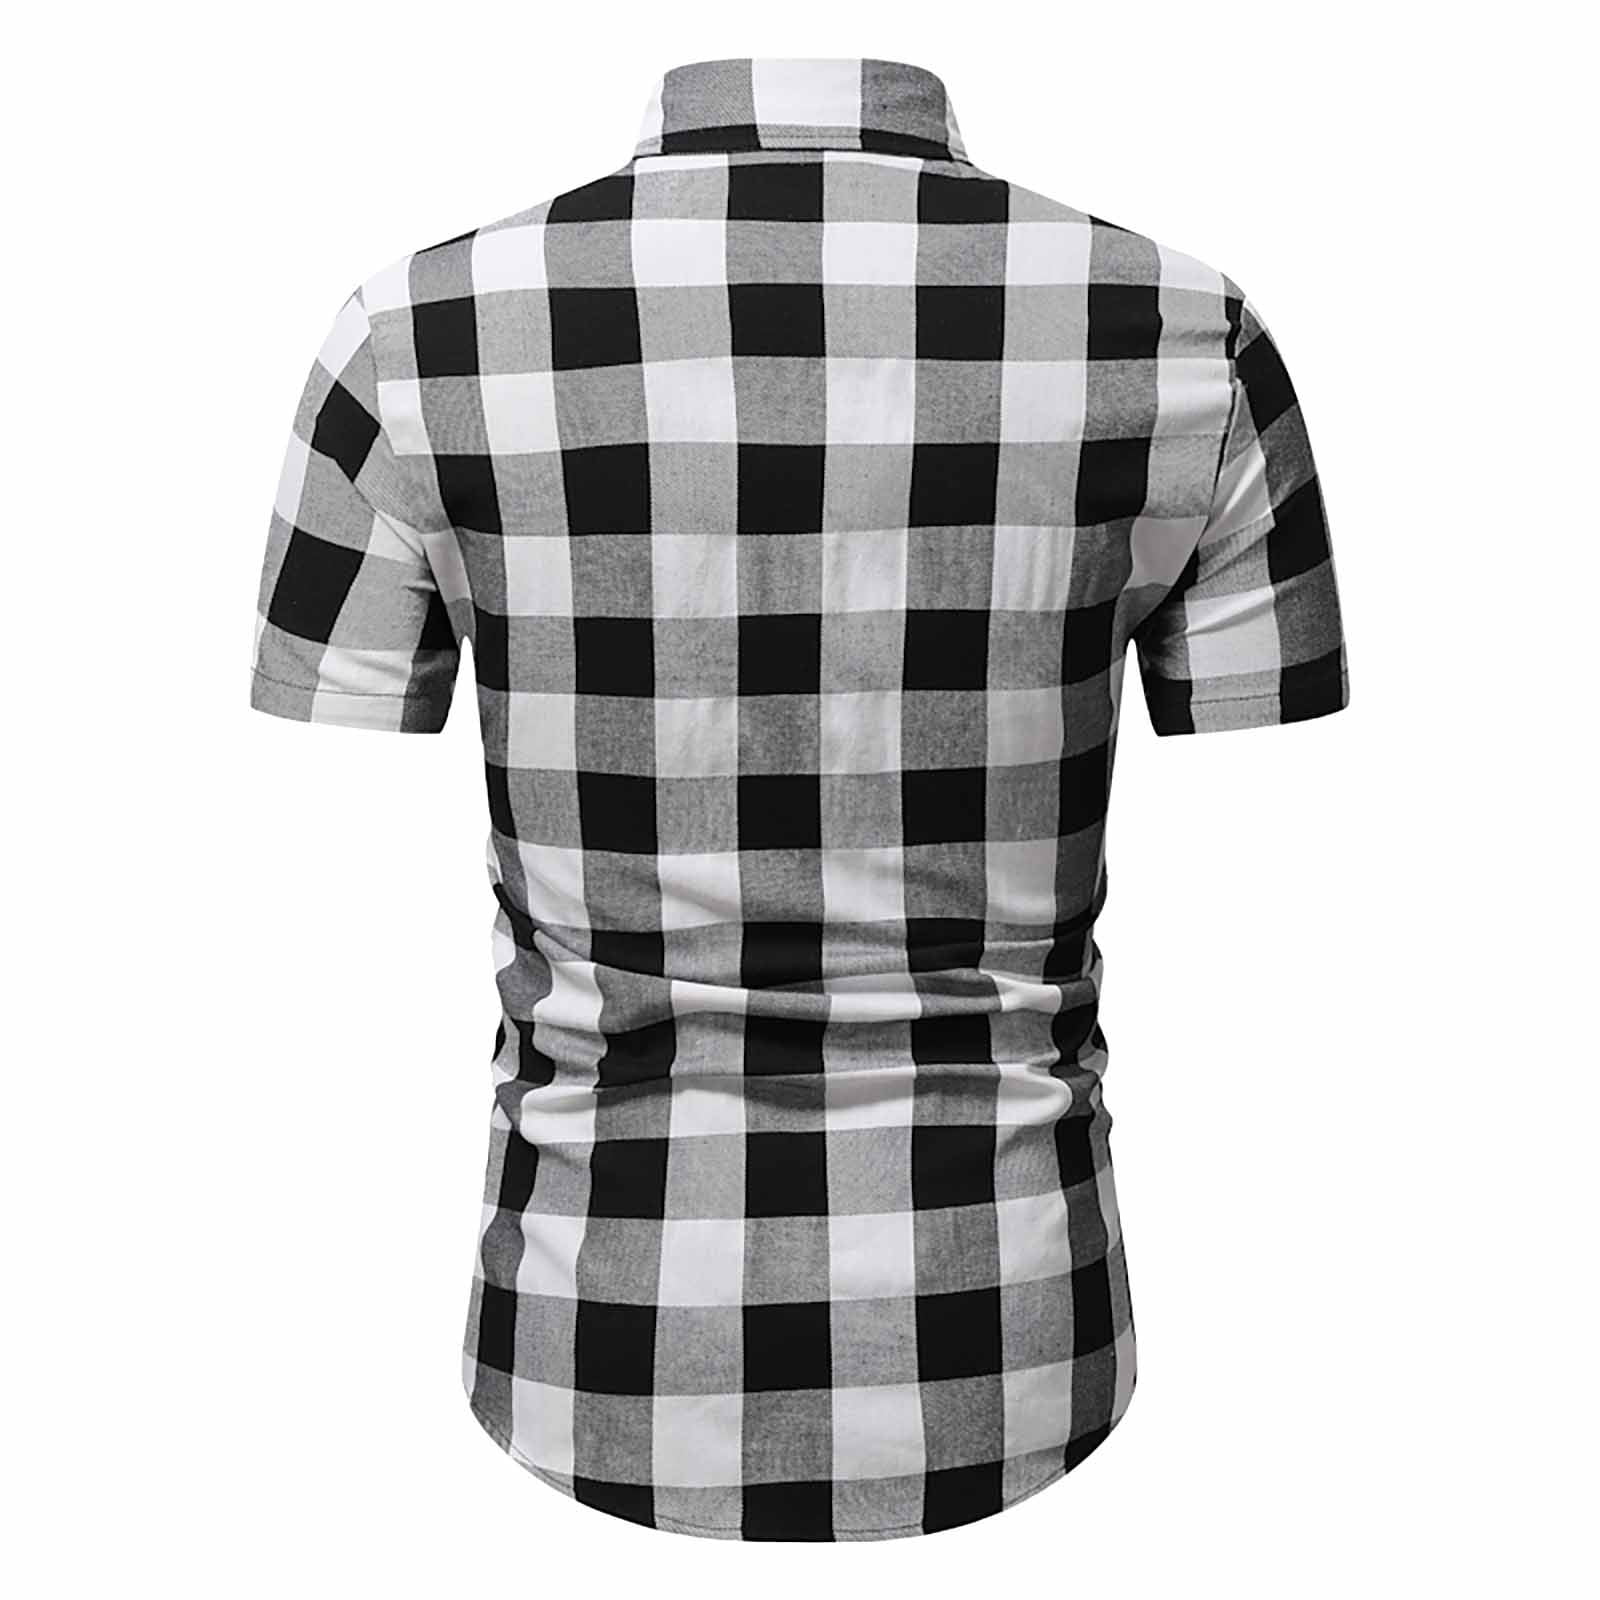 VSSSJ Button Down Shirts for Men Relaxed Fit Summer Plaid Tweed Short  Sleeve Casual Lapel Shirt Comfy Breathable Quick Dry Shirt Blouse White XXL  